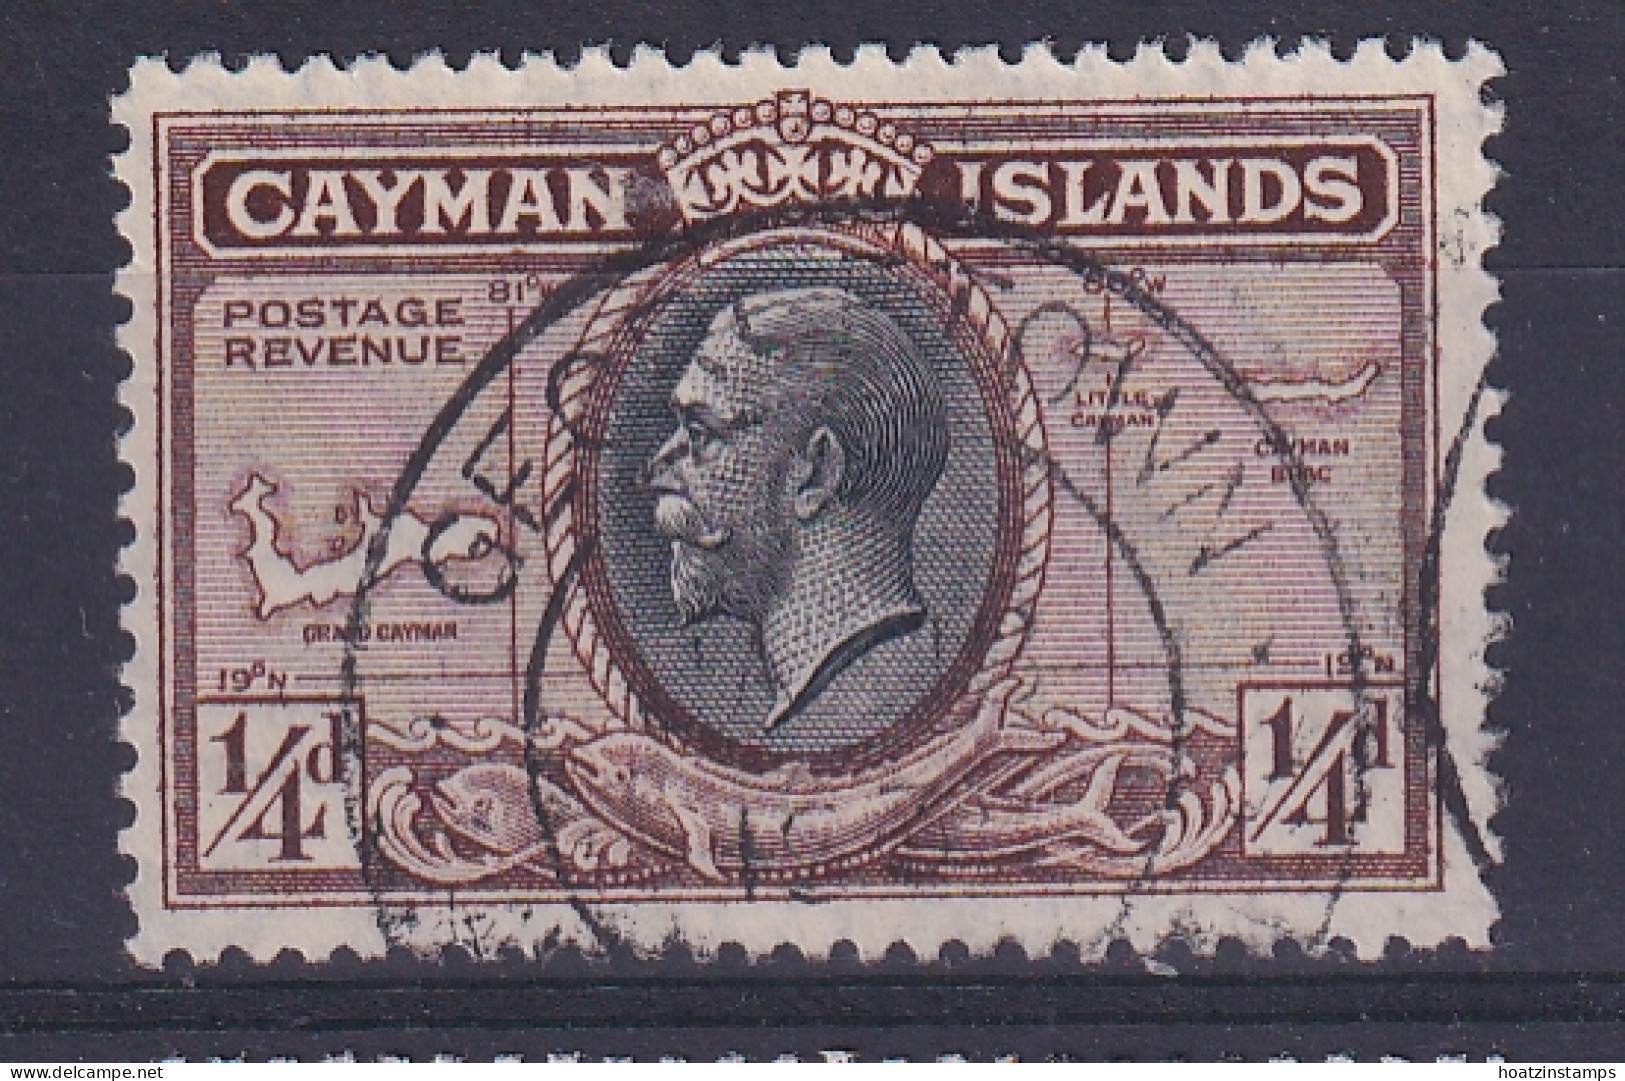 Cayman Islands: 1935   KGV - Pictorial   SG96   ¼d     Used - Kaimaninseln